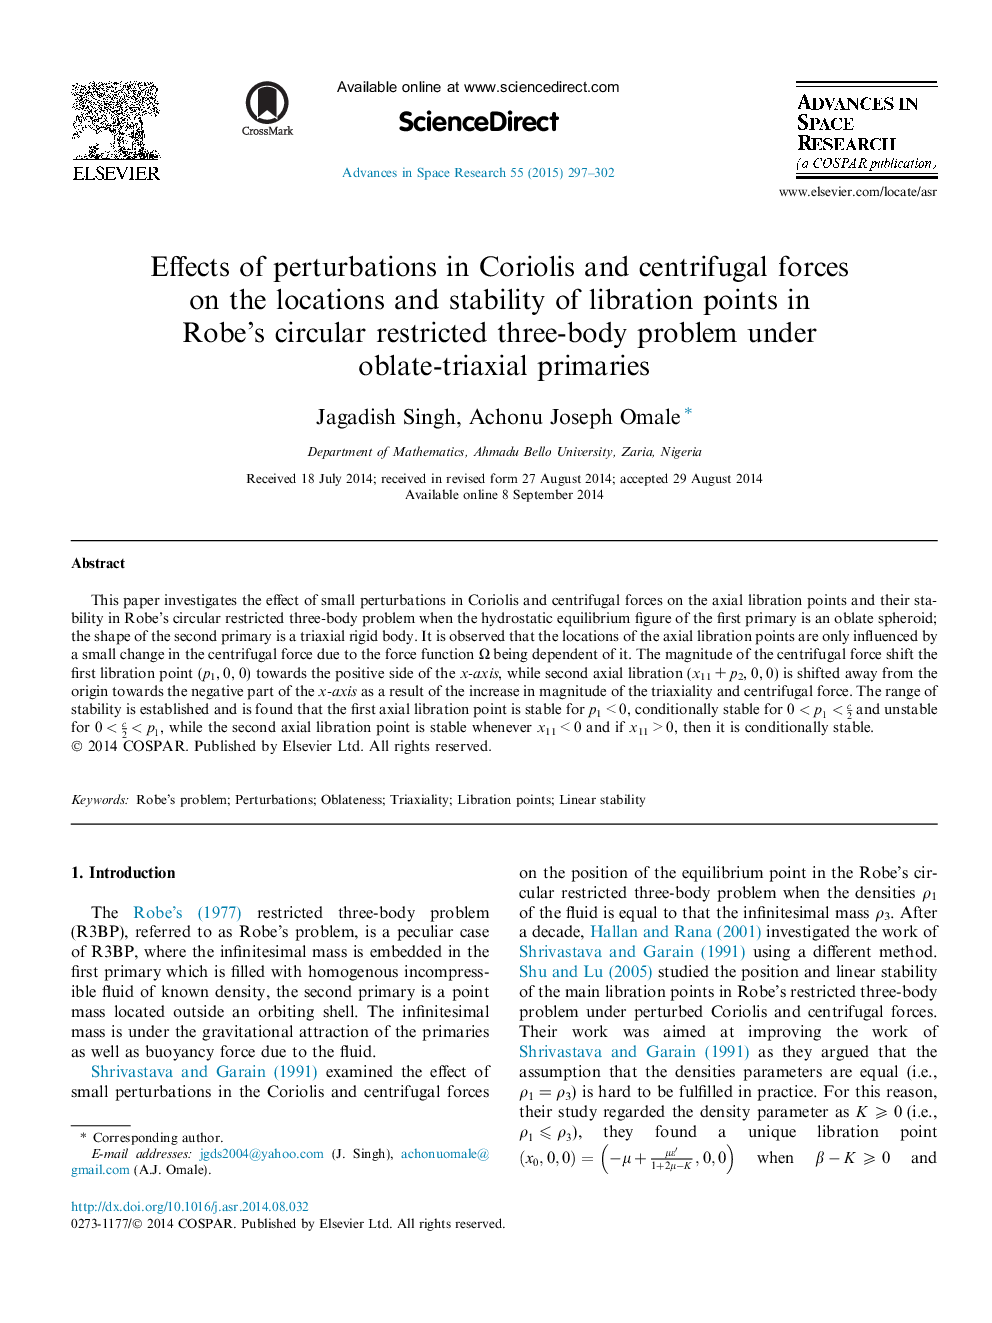 Effects of perturbations in Coriolis and centrifugal forces on the locations and stability of libration points in Robe's circular restricted three-body problem under oblate-triaxial primaries